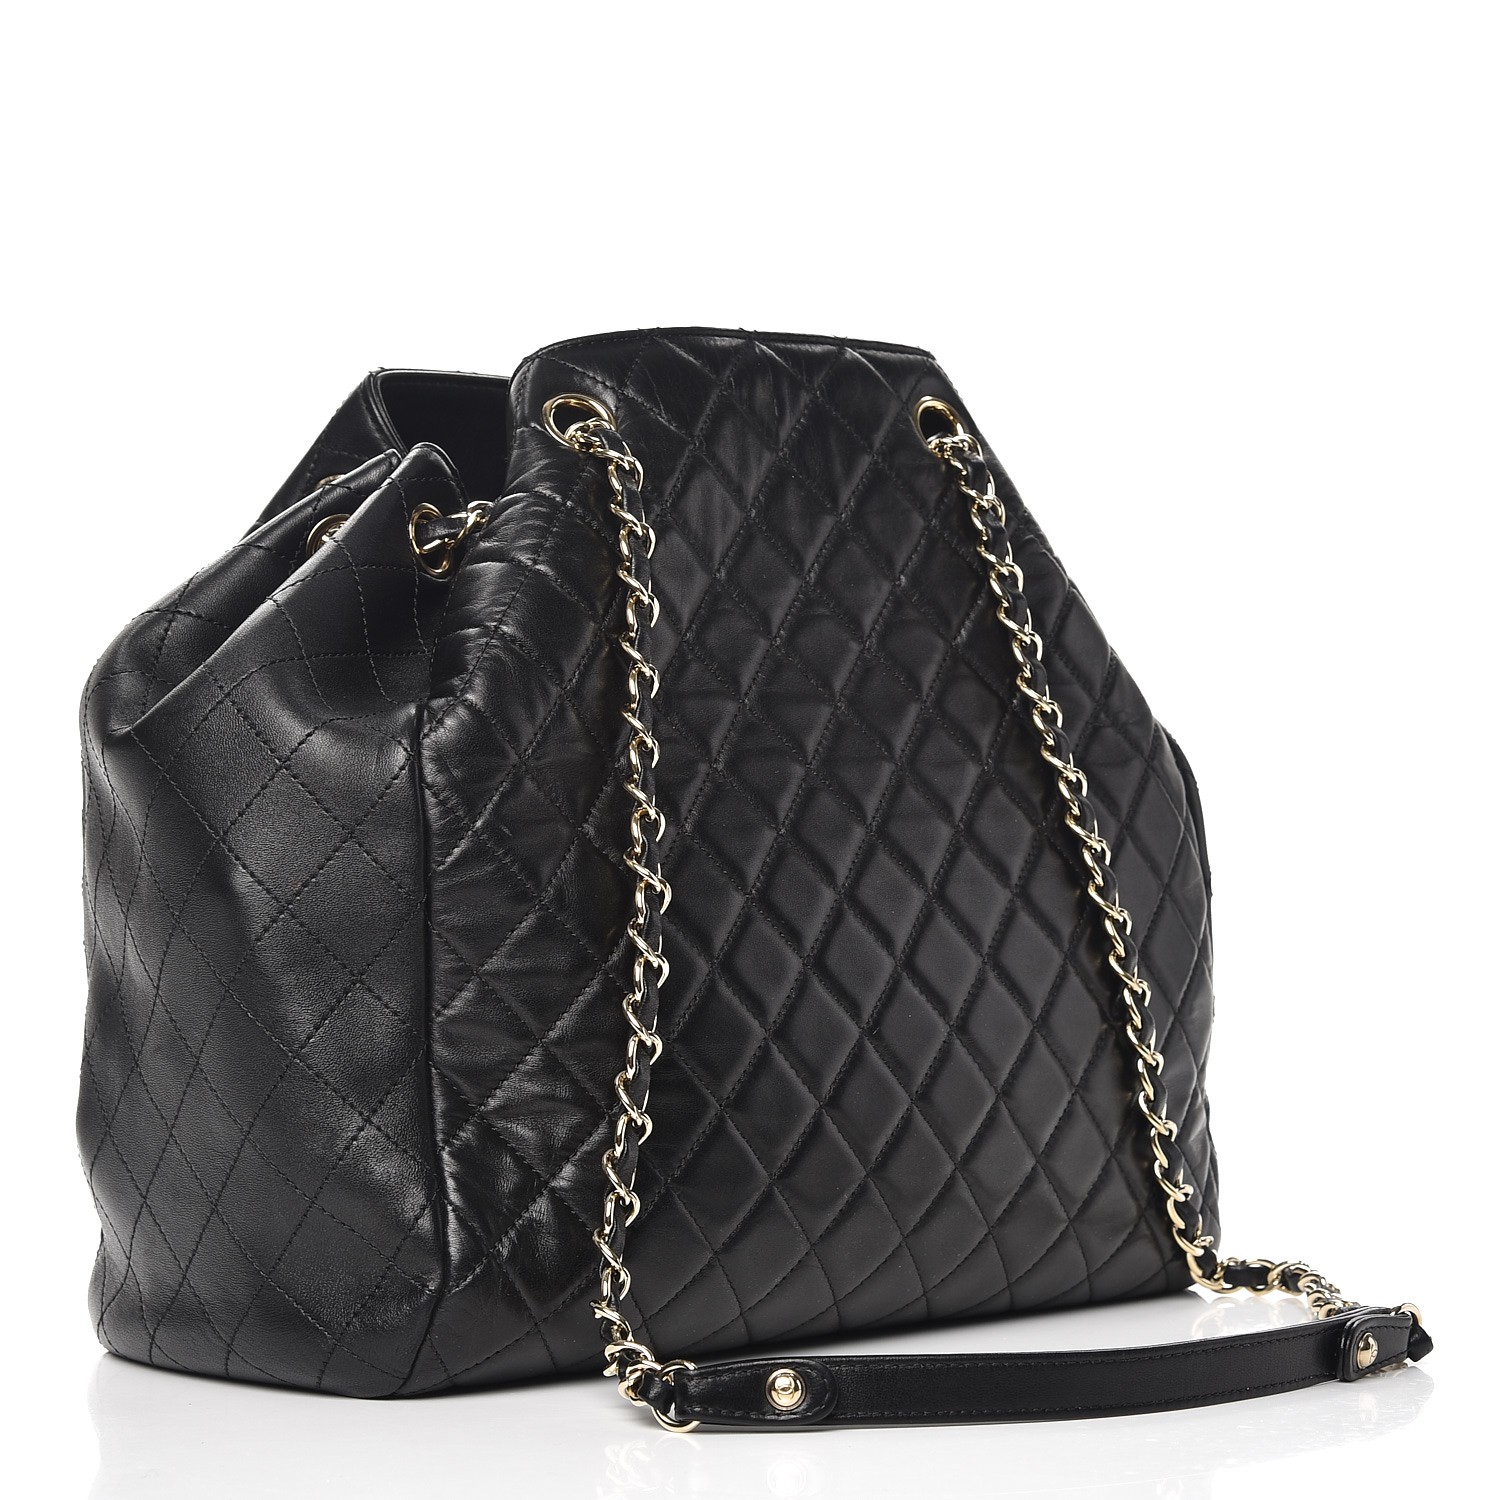 CHANEL Lambskin Quilted Large Drawstring Bag Black 239187